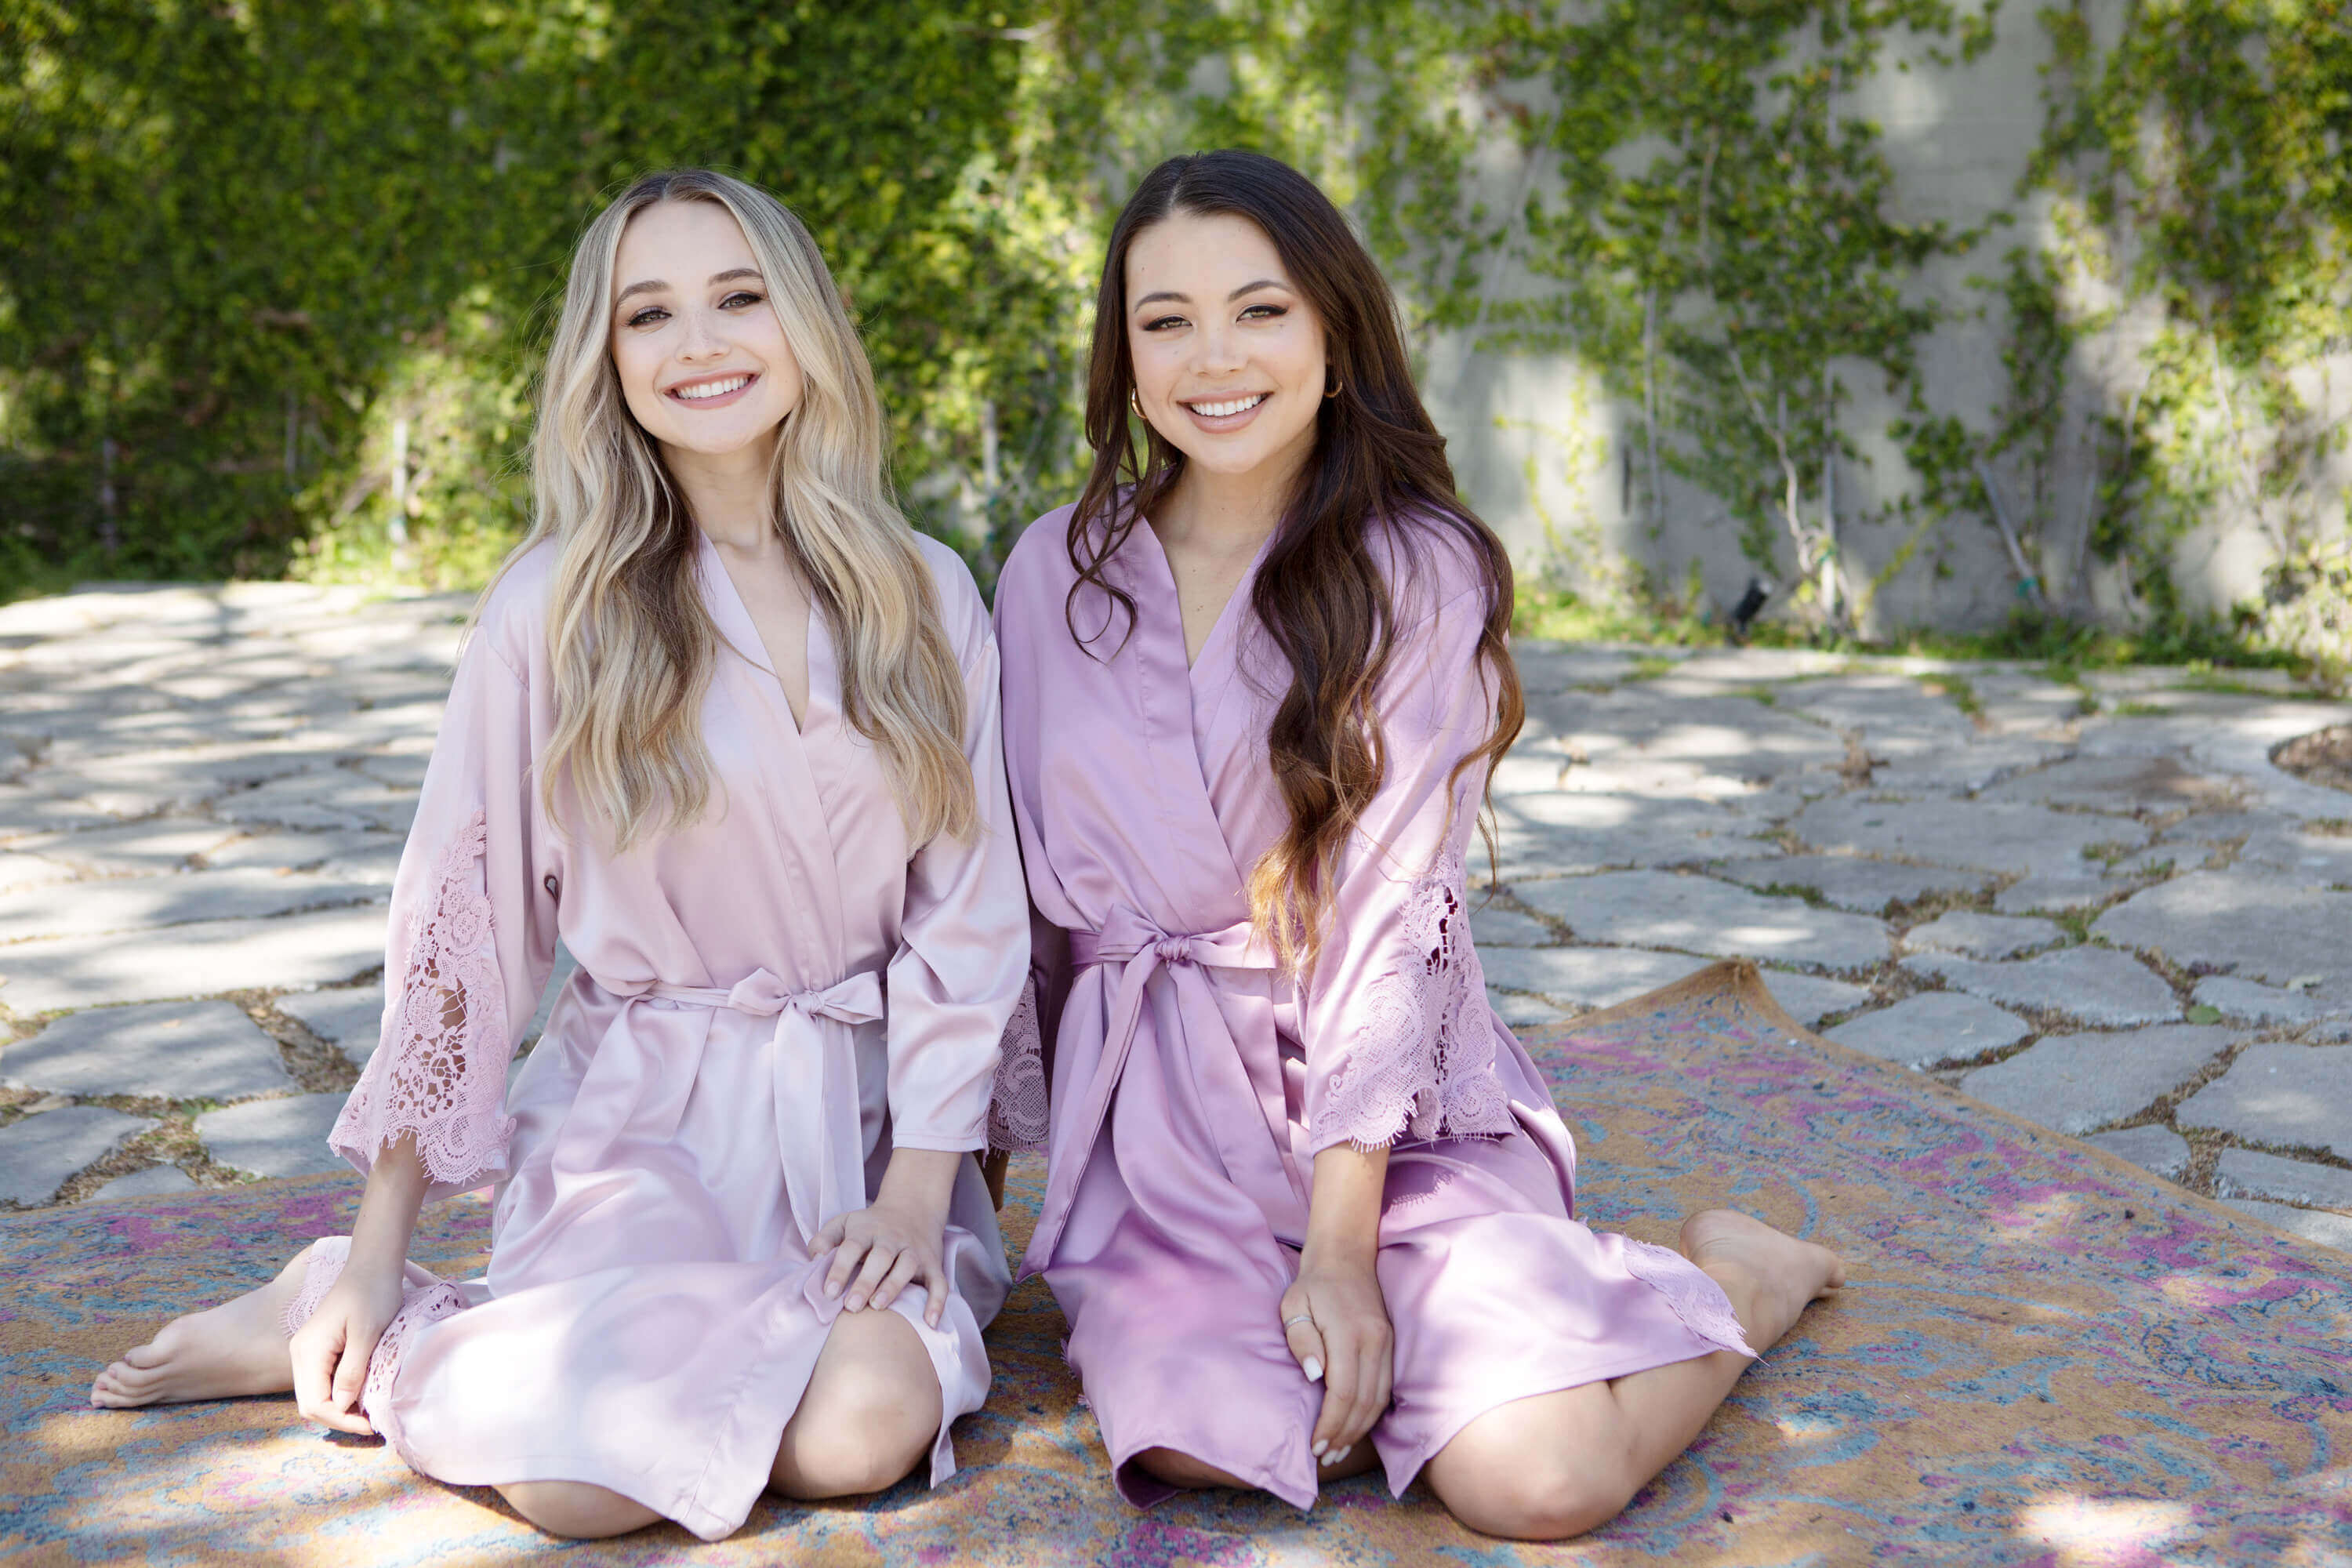 Personalized Lace Bridal Robe - Two beautiful models dressed in mauve and nude pink bridal robes with lace trim in preparation for a bachelorette party, wedding or any fun occasion.